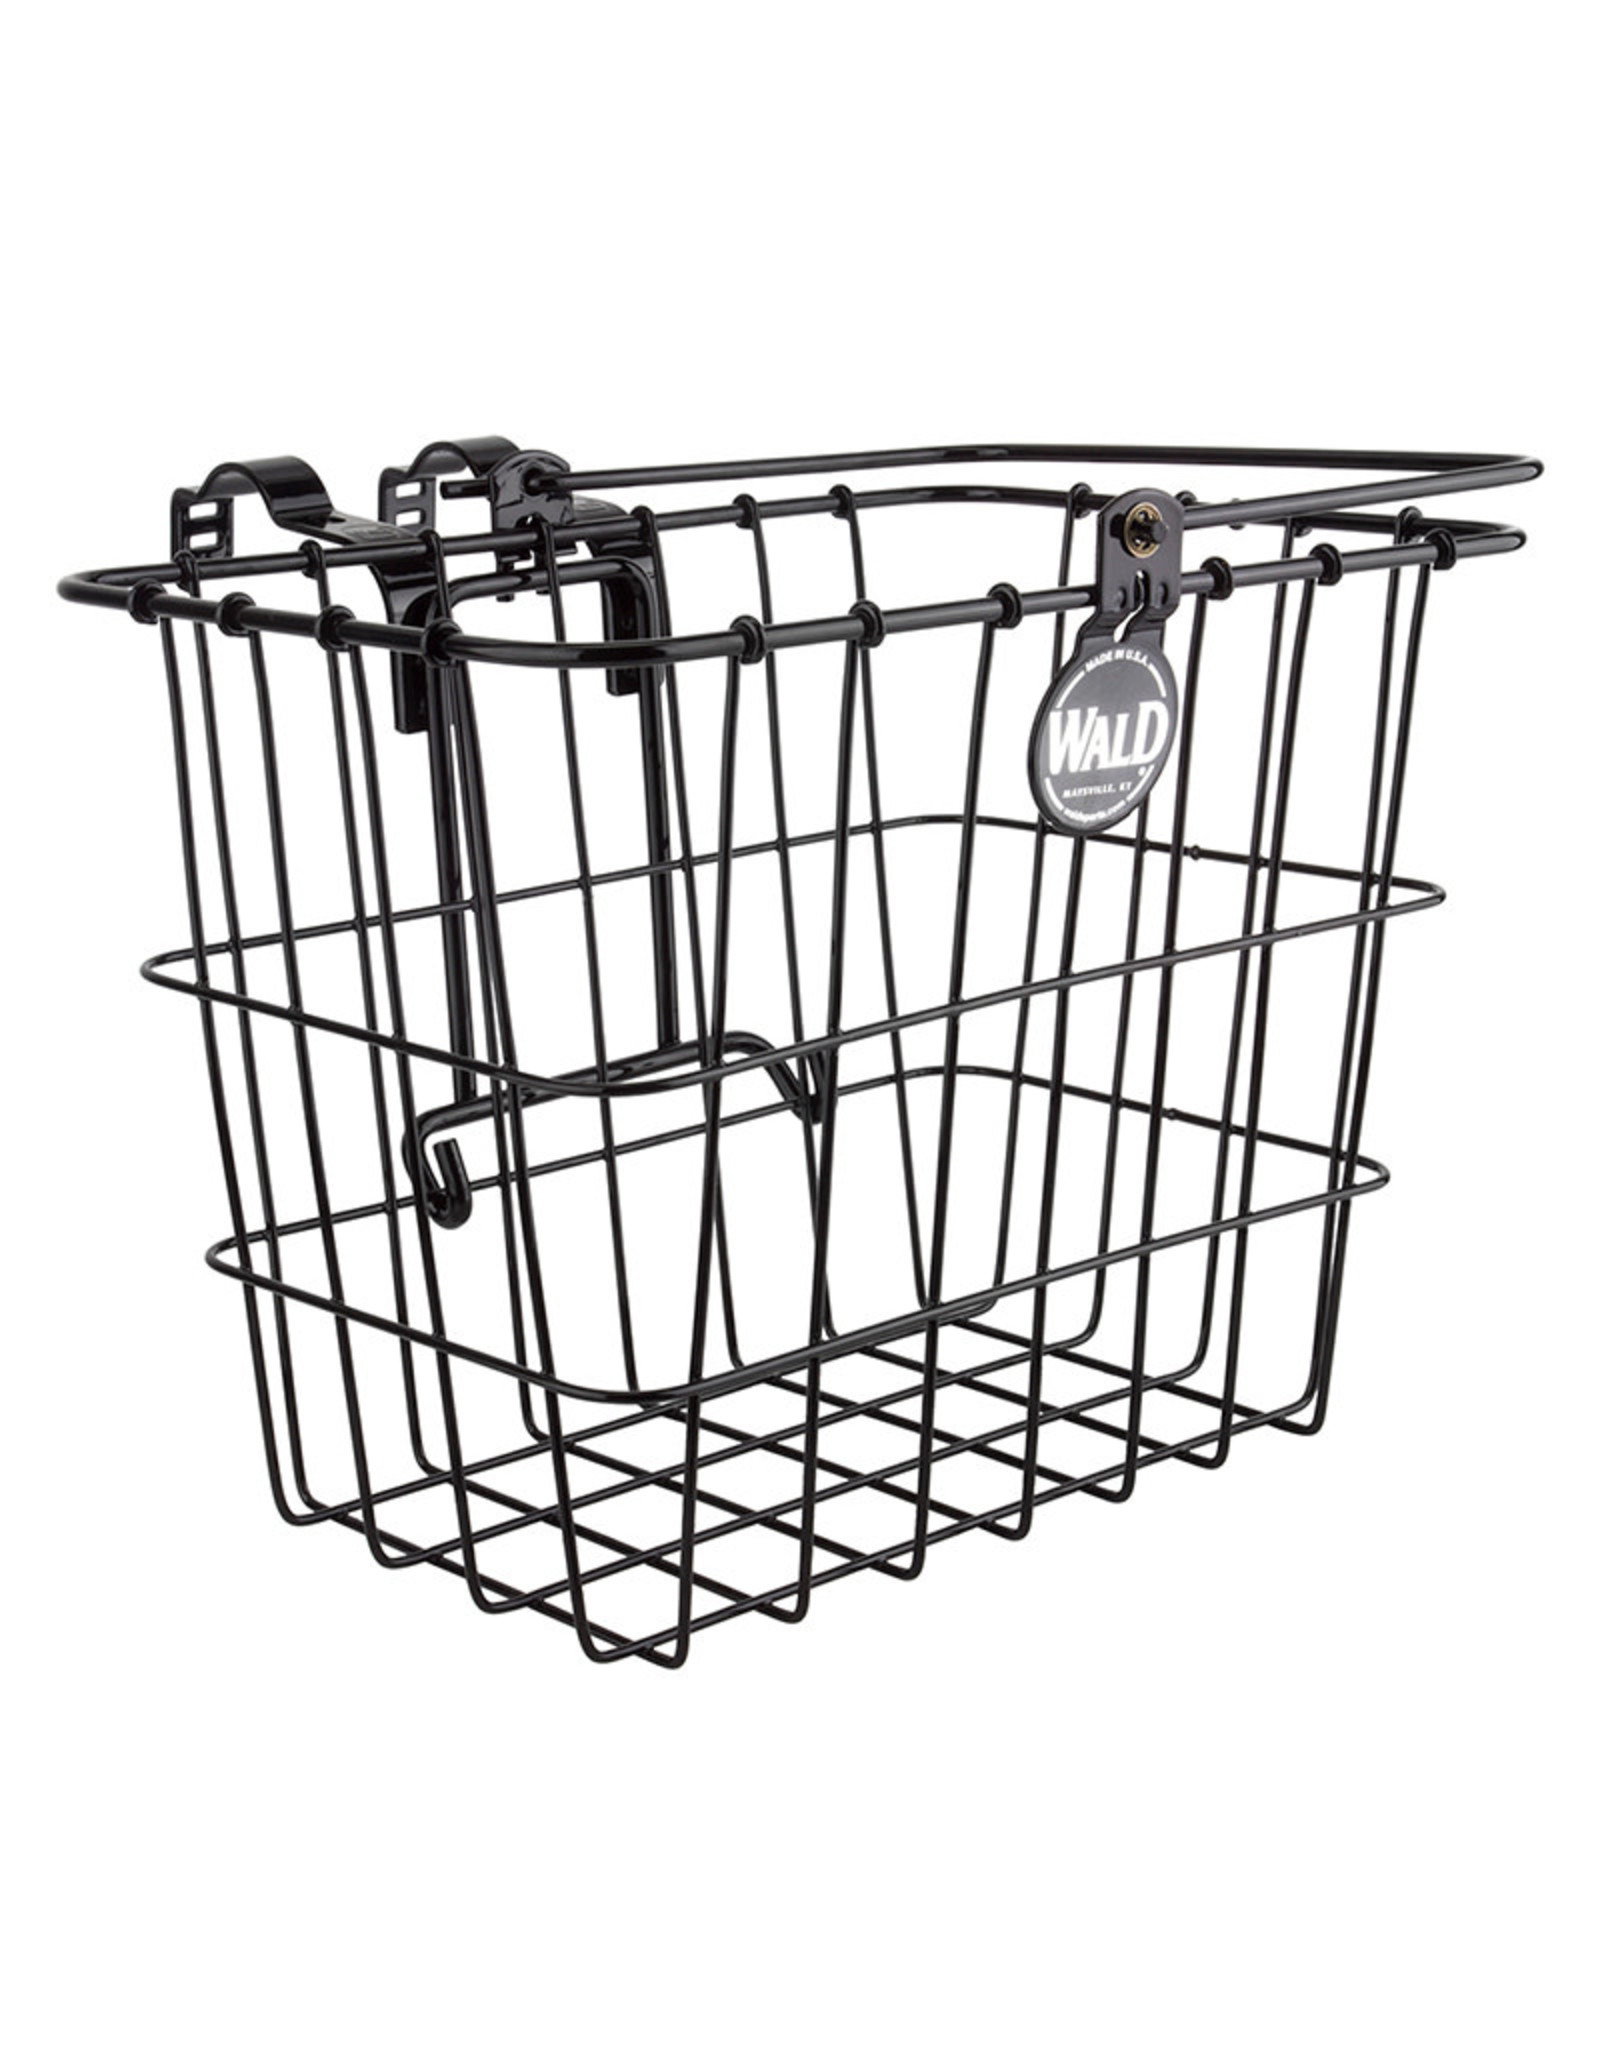 WALD Wald 3114 Front Quick Release Basket w/ Bolt-On Mount 11x8x9" Black